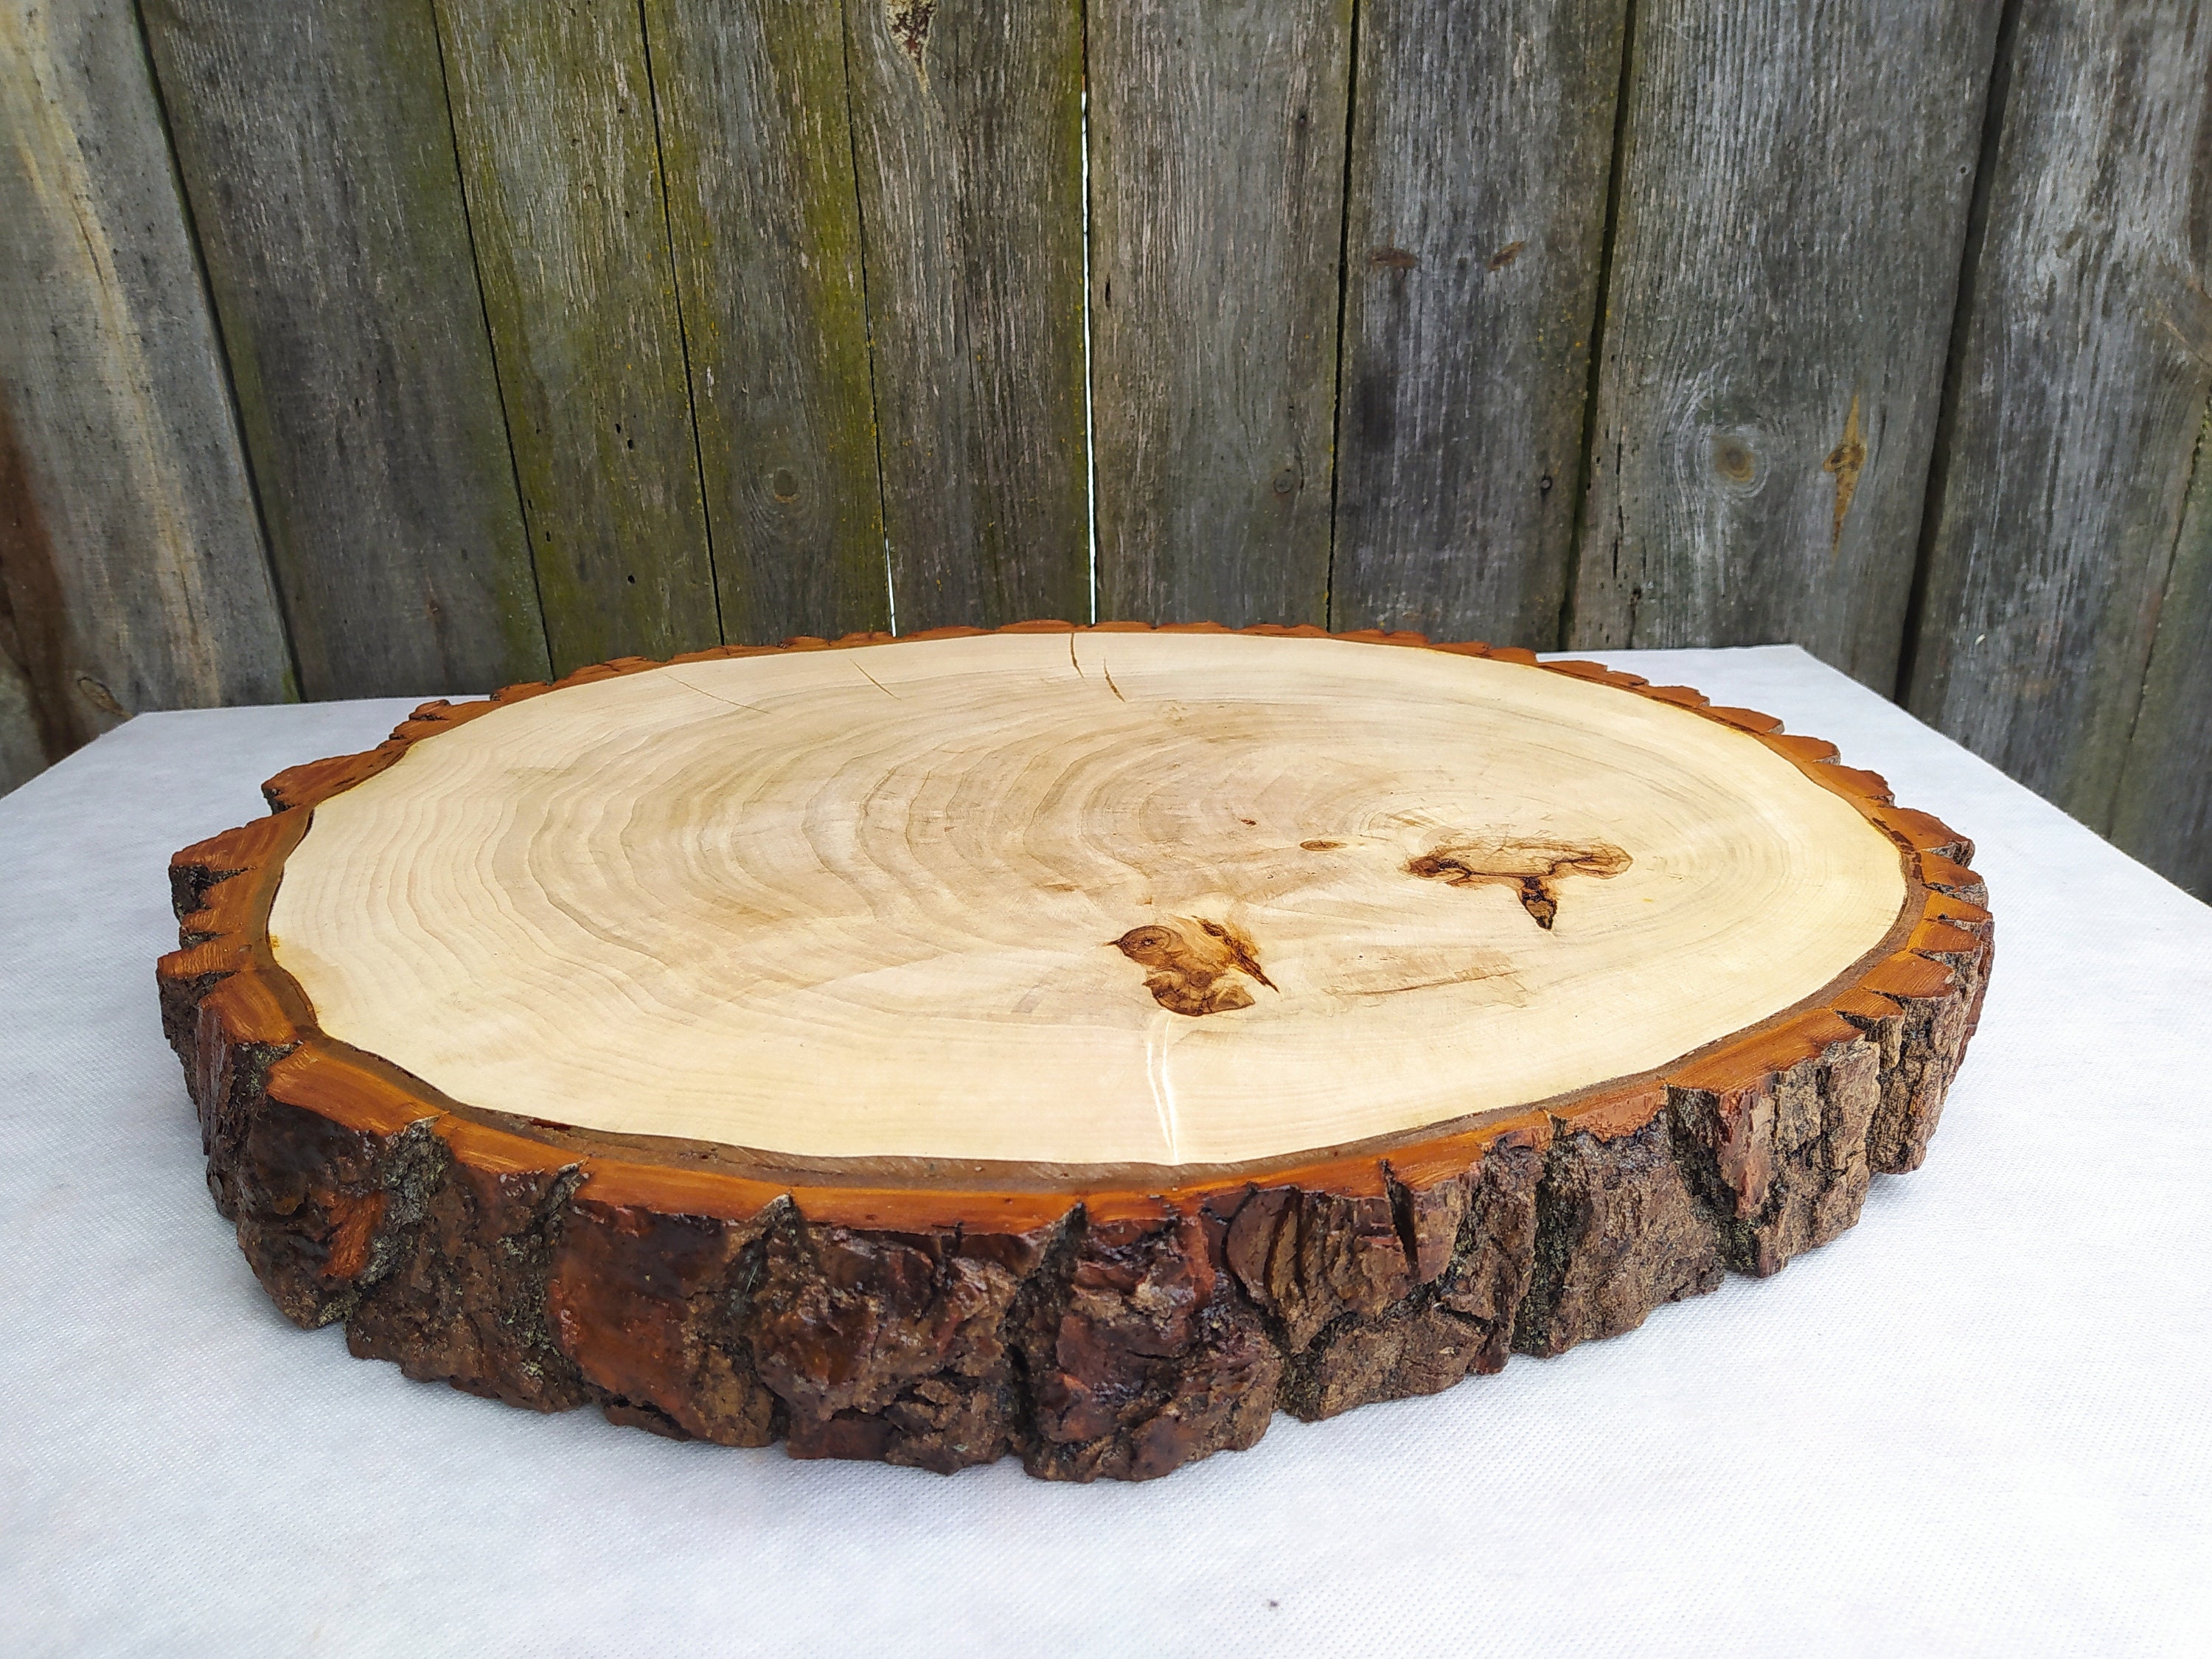 20 pc. 10 inch wood slabs wood slab centerpieces tree